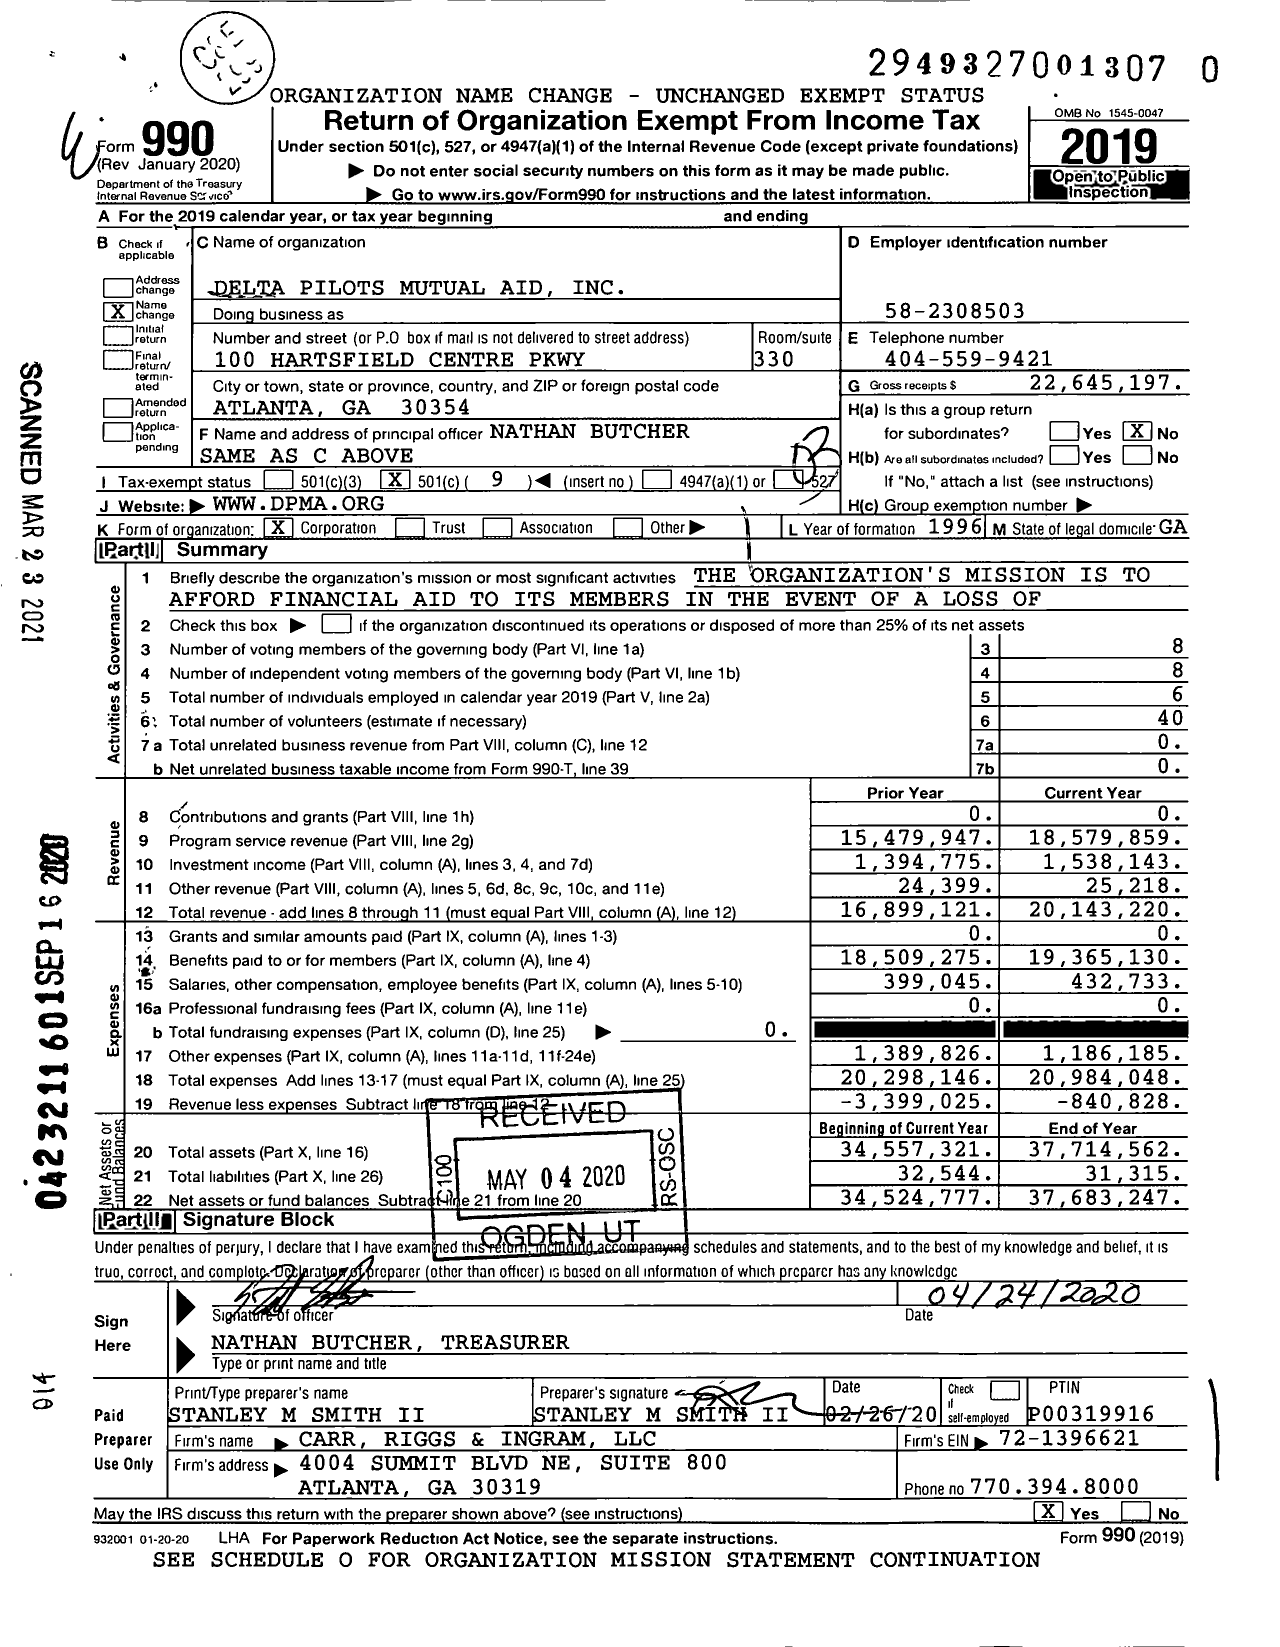 Image of first page of 2019 Form 990 for Delta Pilots Mutual Aid